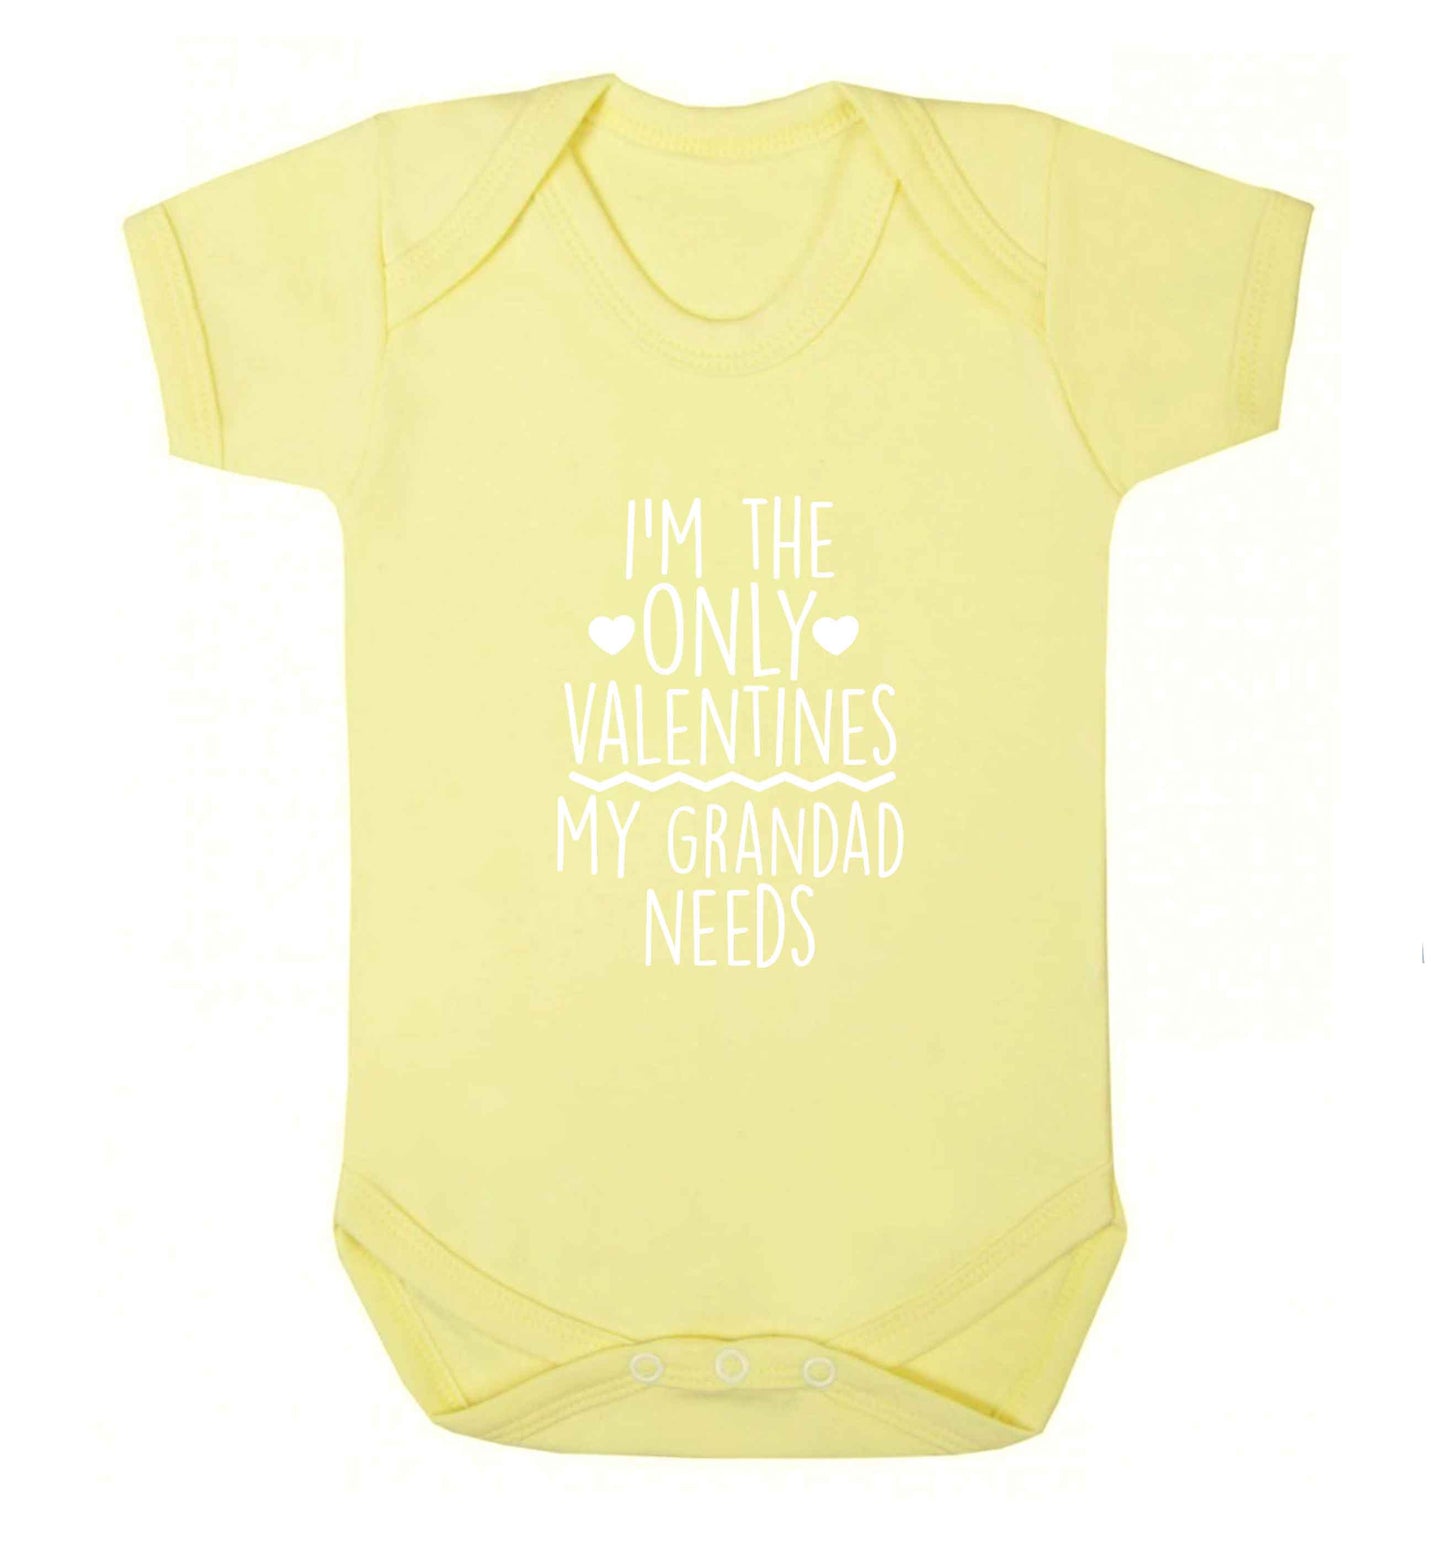 I'm the only valentines my grandad needs baby vest pale yellow 18-24 months